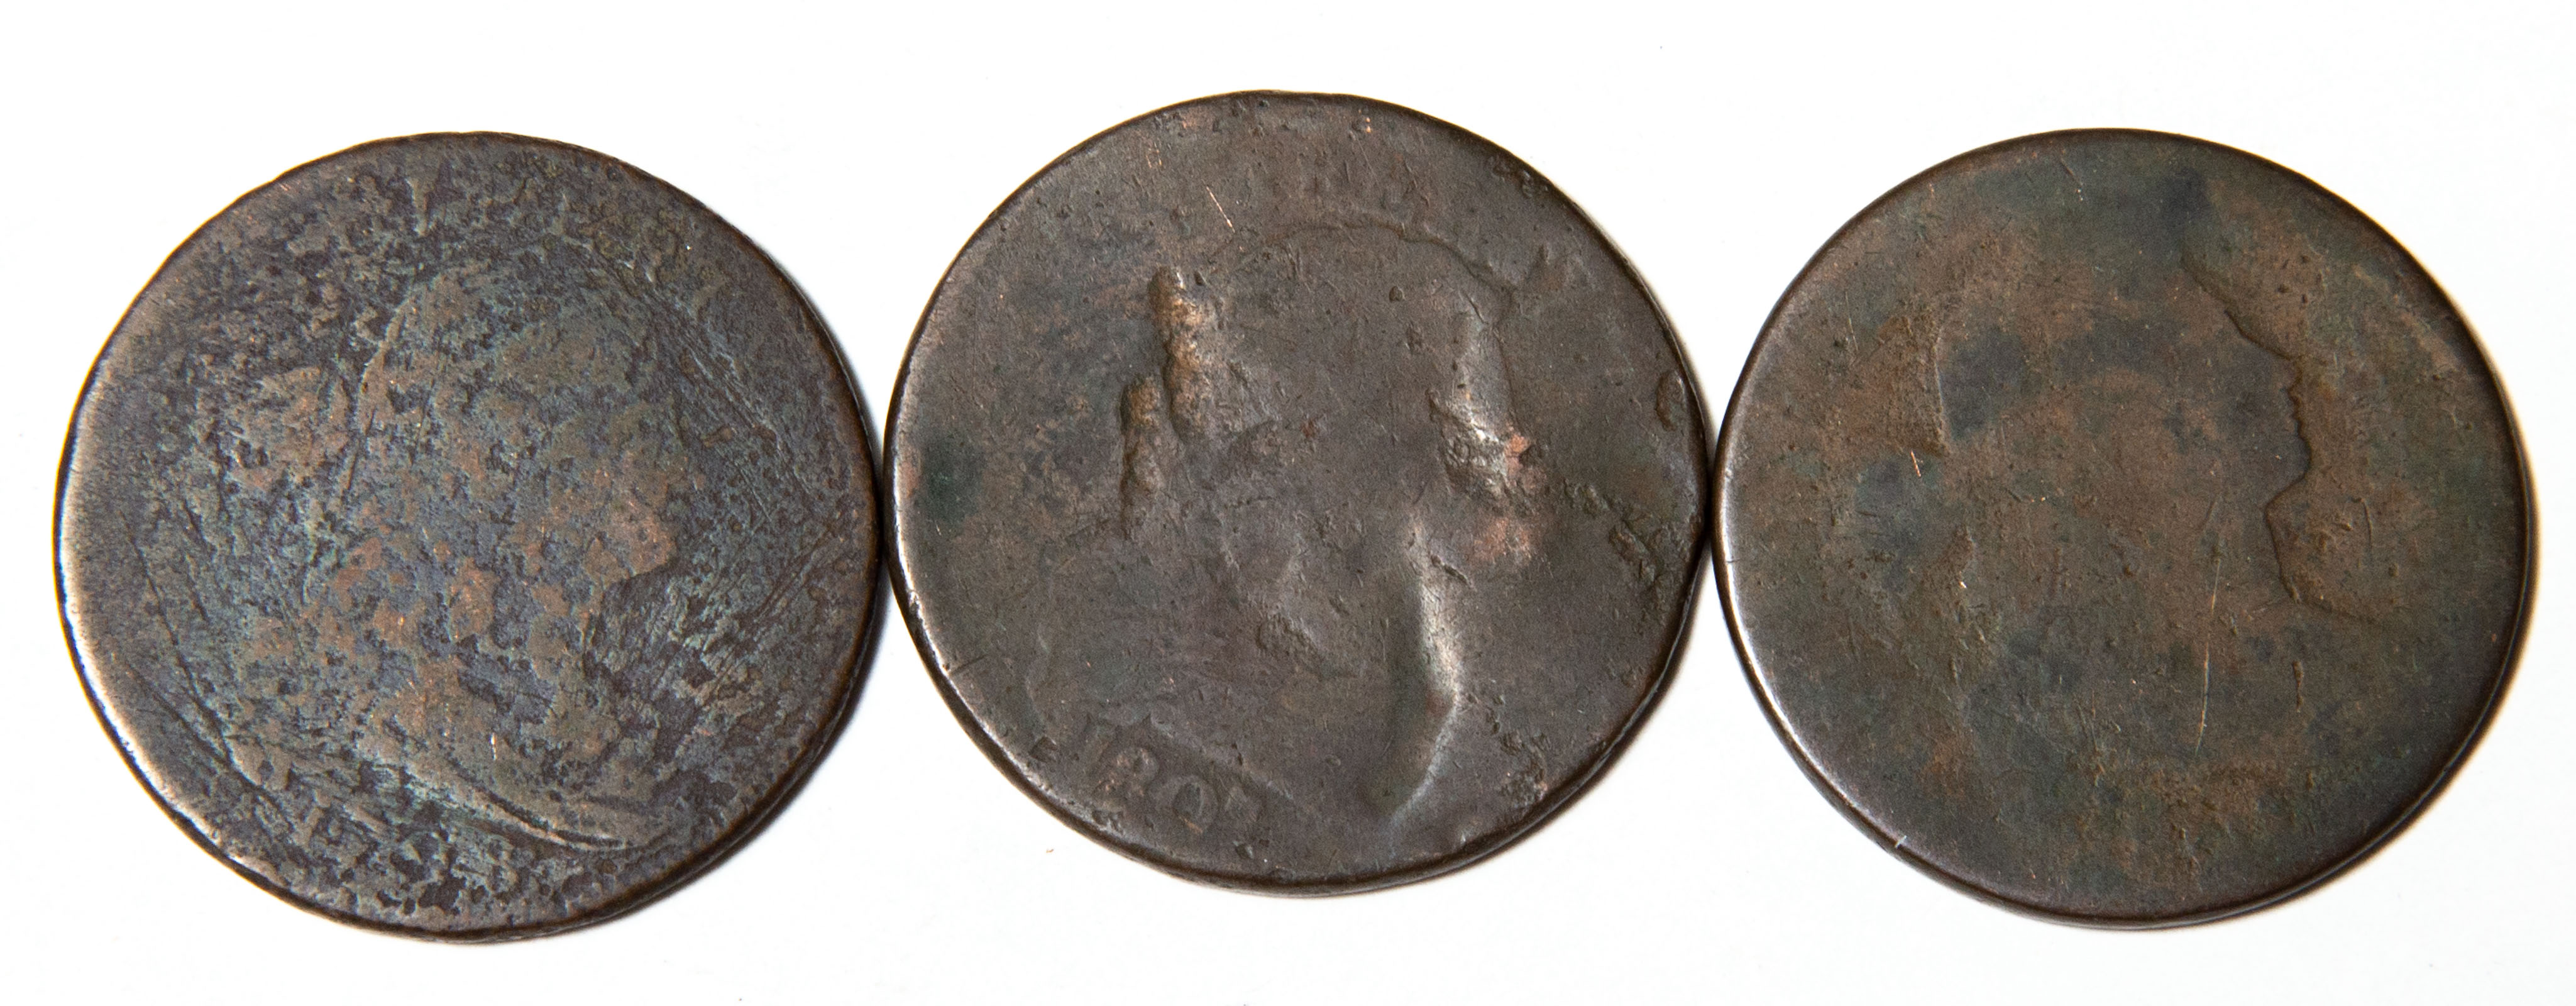 THREE DRAPED BUST LARGE CENTS WITH